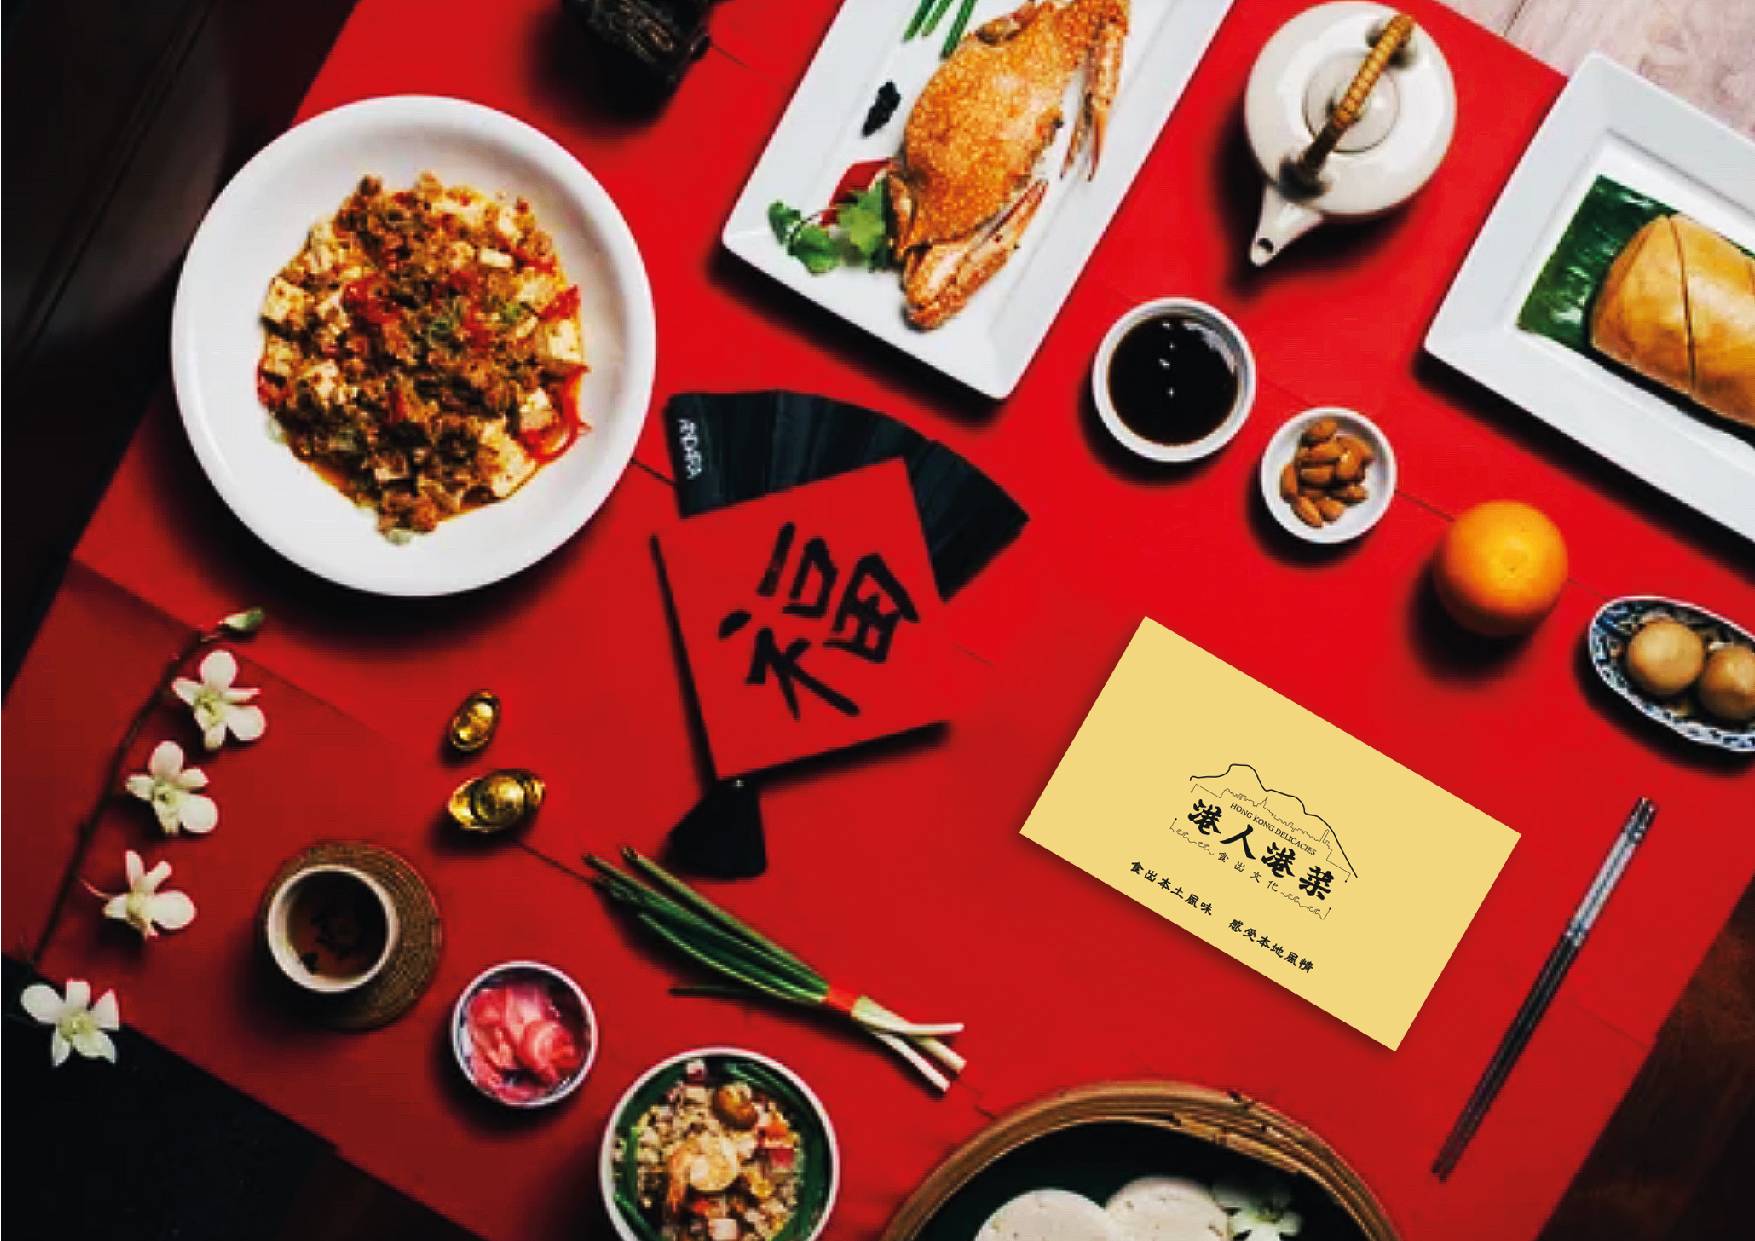  Hong Kong Delicacies rebranding for a business card design on the food table